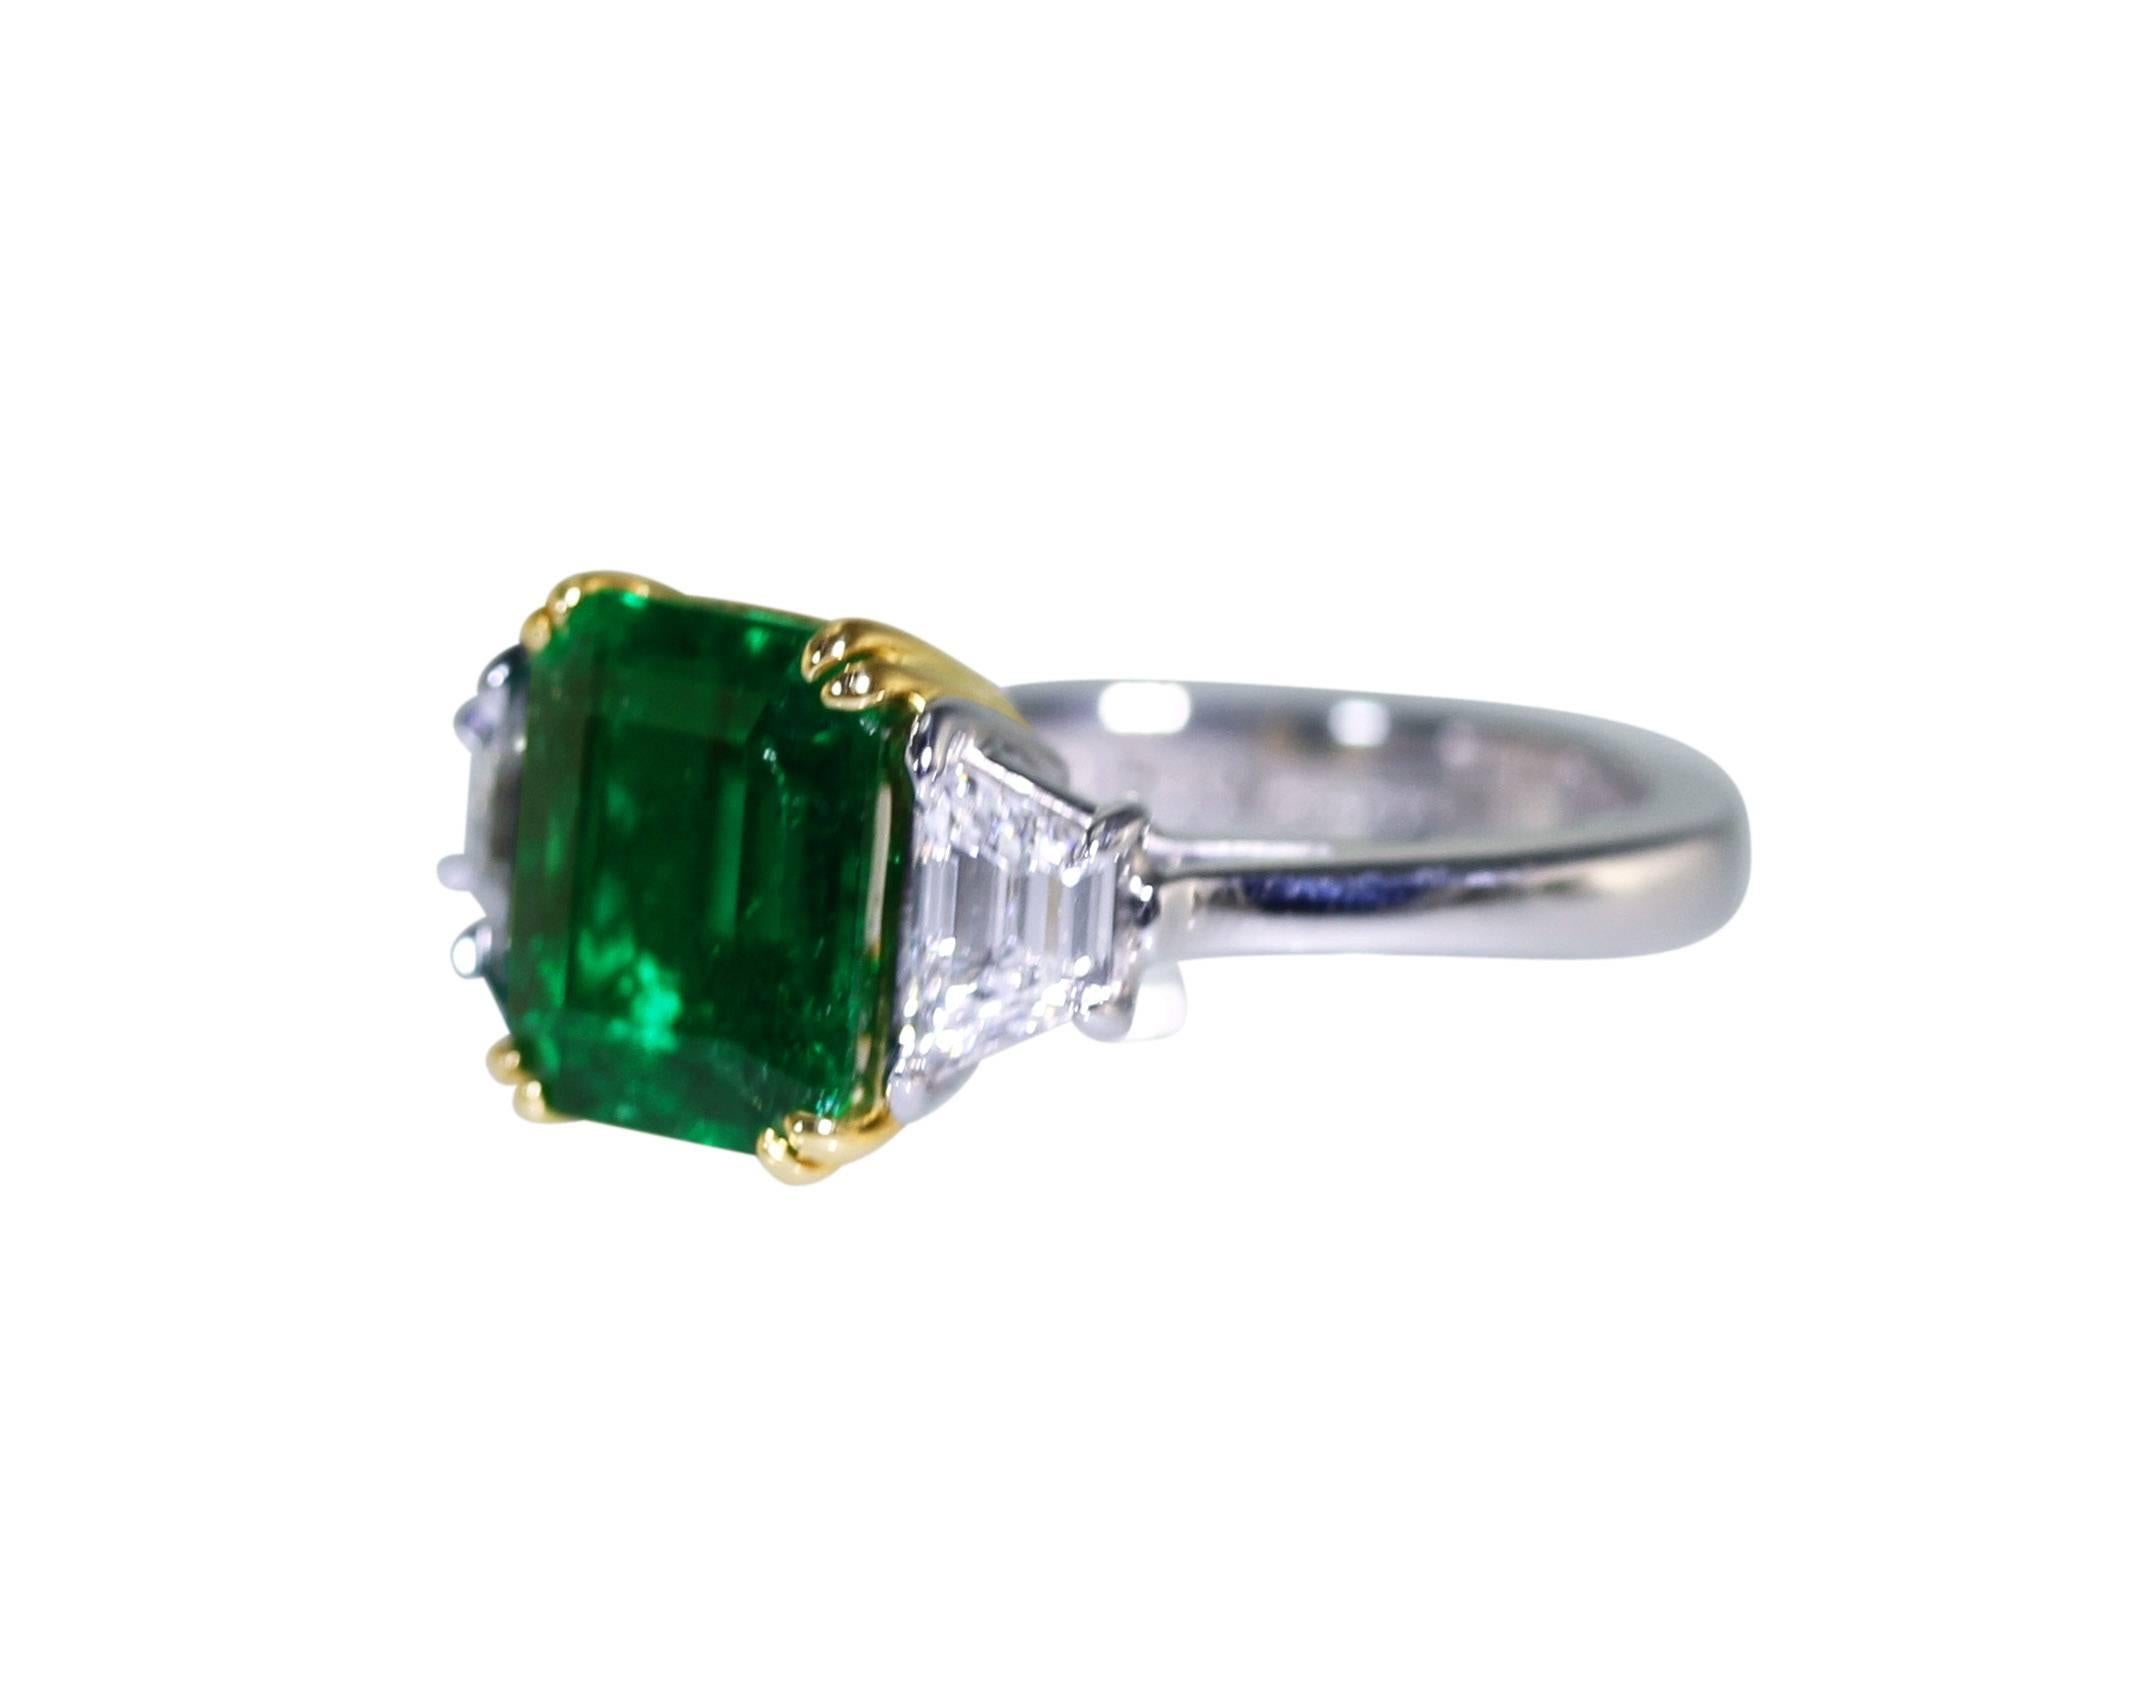 Platinum, 18 karat yellow gold, emerald and diamond ring, set in the center with an emerald-cut emerald weighing 3.33 carats, flanked by 2 trapezoid diamonds weighing 0.89 carat, gross weight 8.6, measuring 3/8 by 7/8 by 1 inch, size 6 1/4, signed